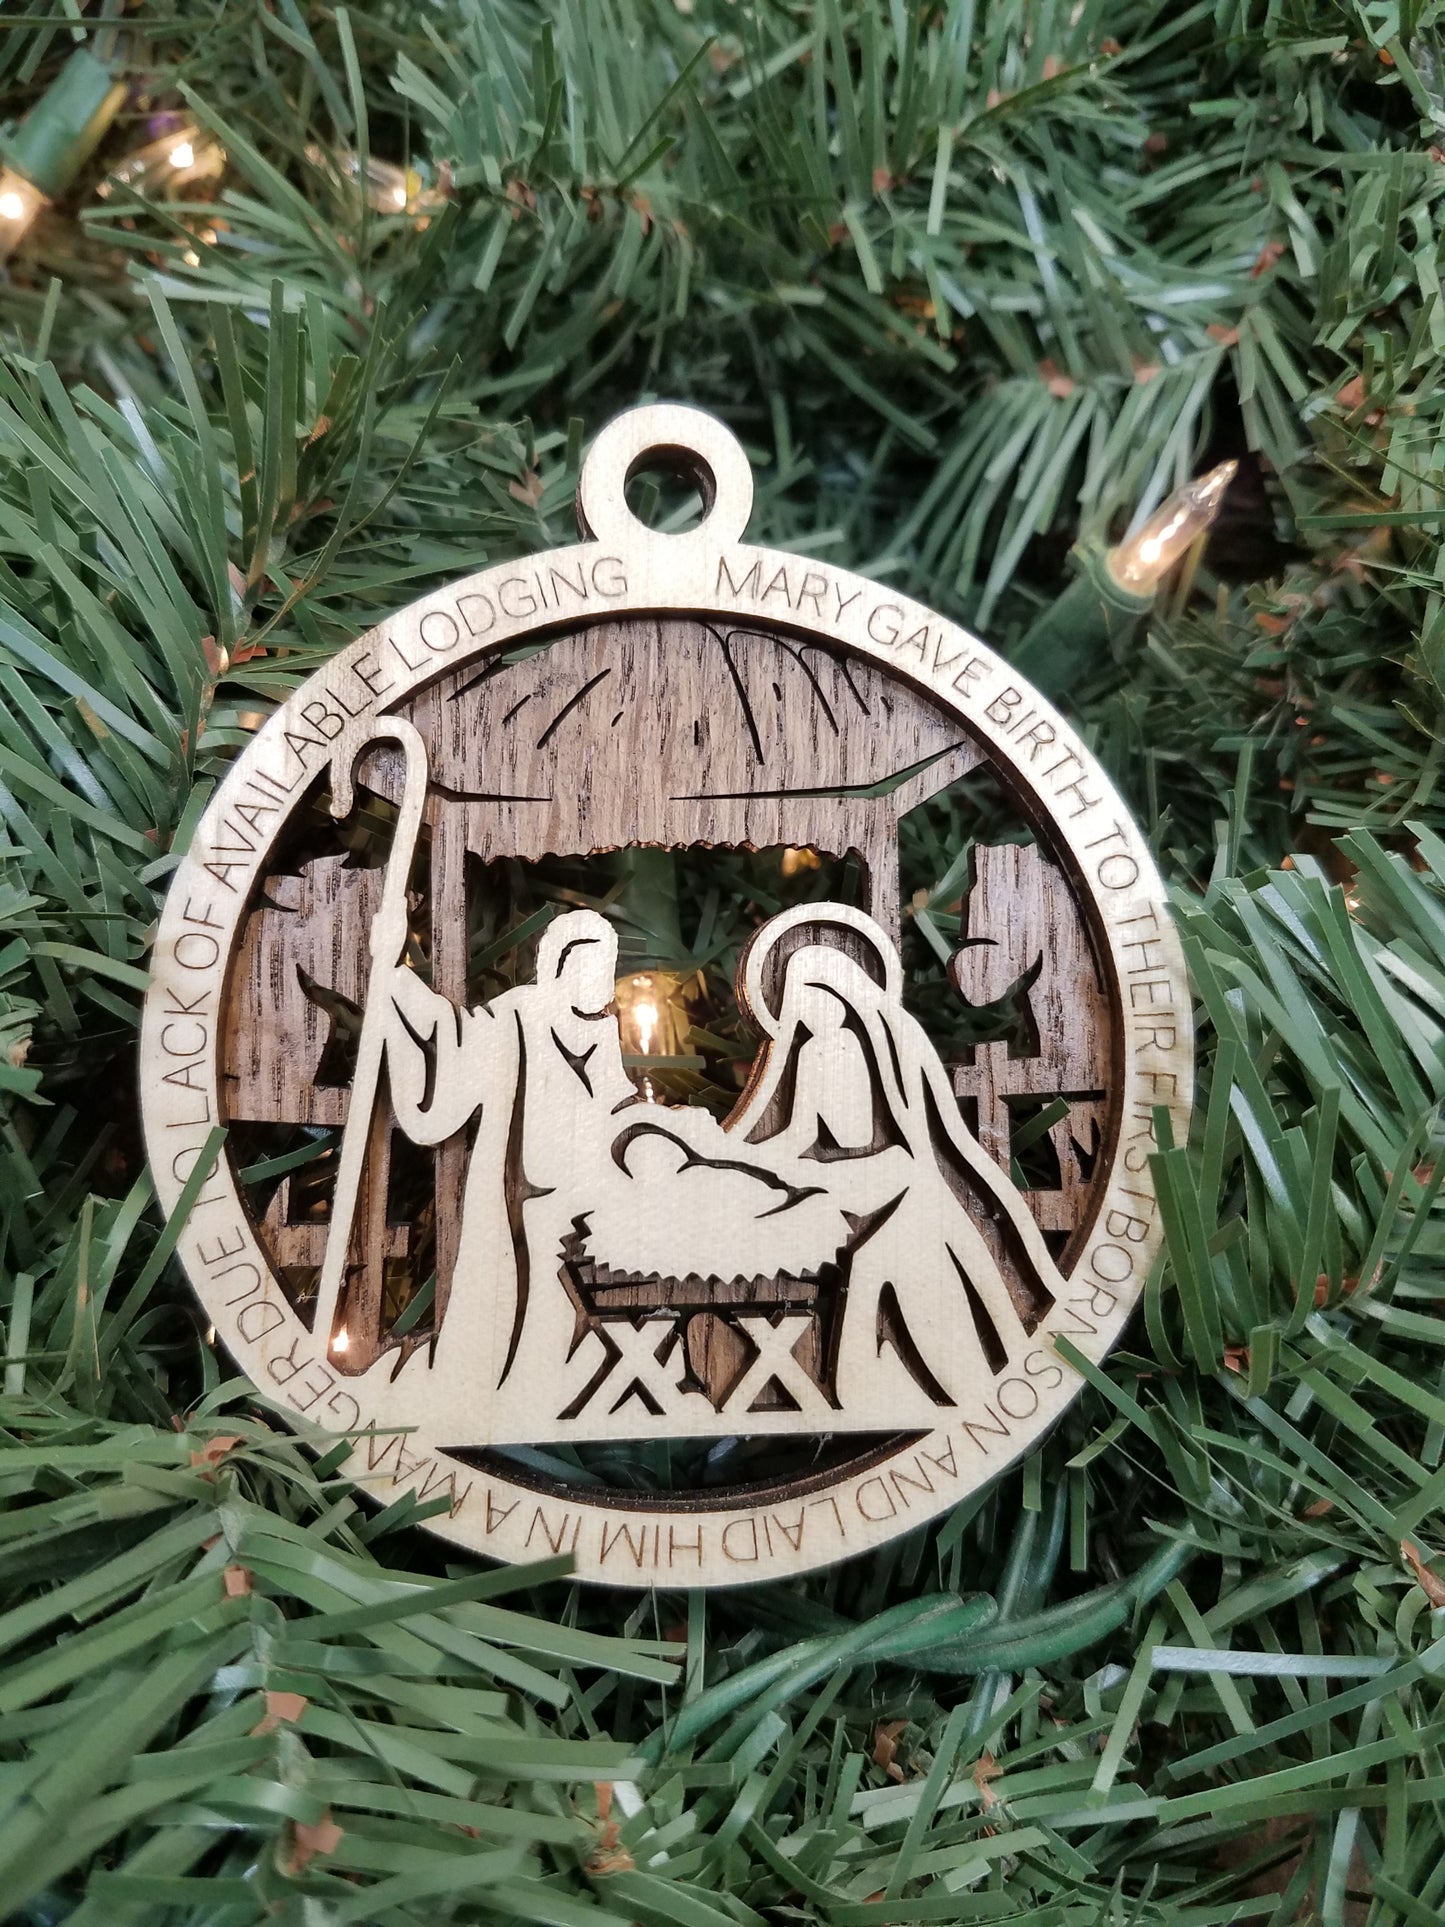 The Christmas Story Ornaments